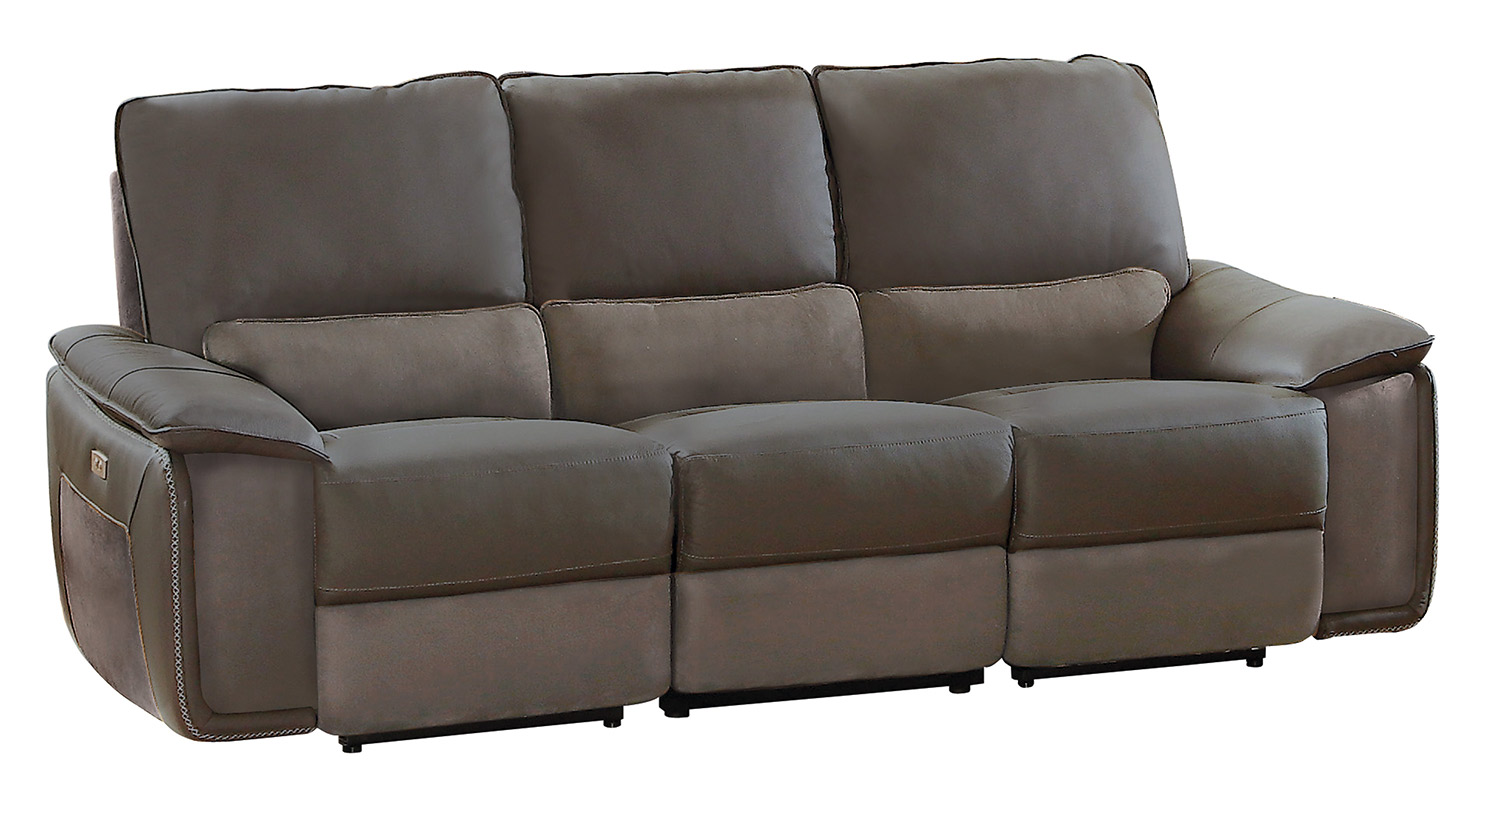 Homelegance Corazon Power Double Reclining Sofa - Navy Gray Top Grain Leather/Fabric